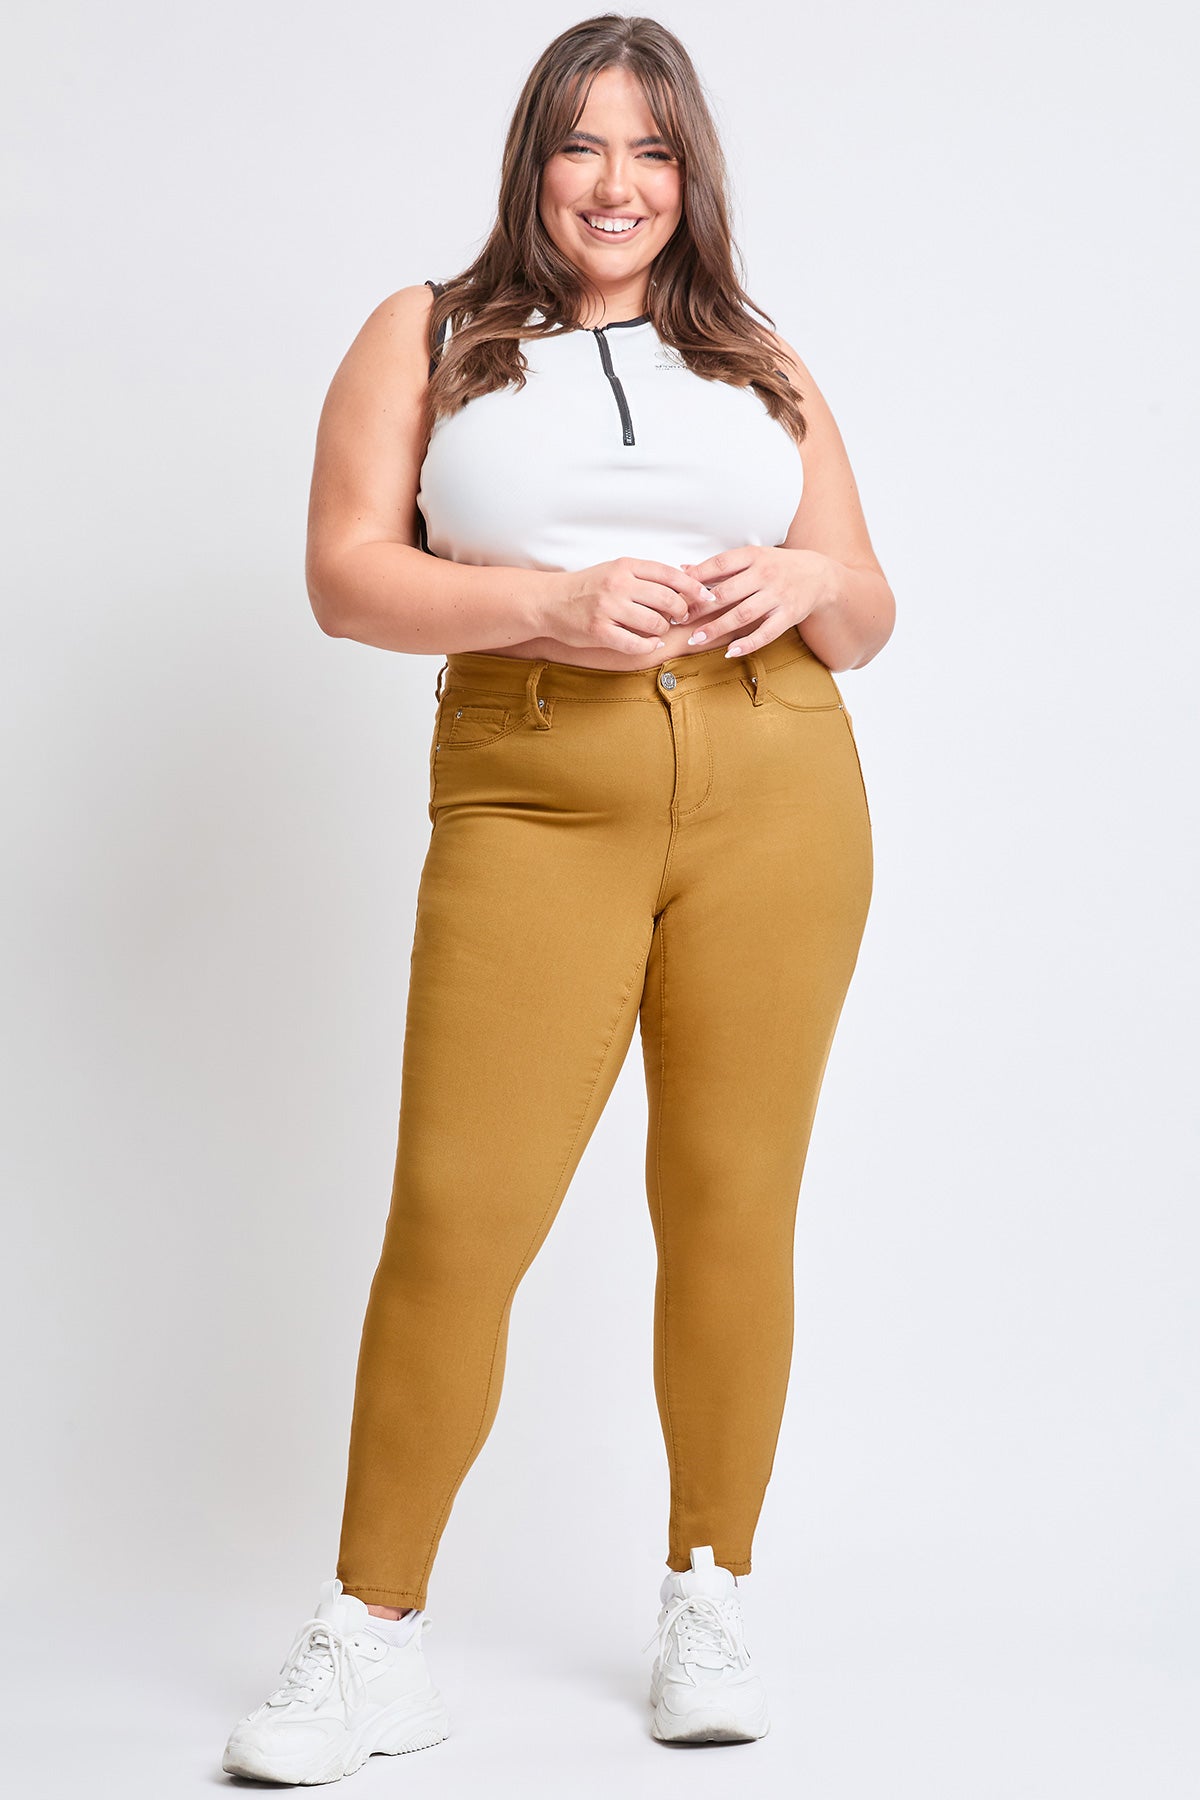 Plus Size Women's Hyperstretch Forever Color Skinny Pants - Warm Tones